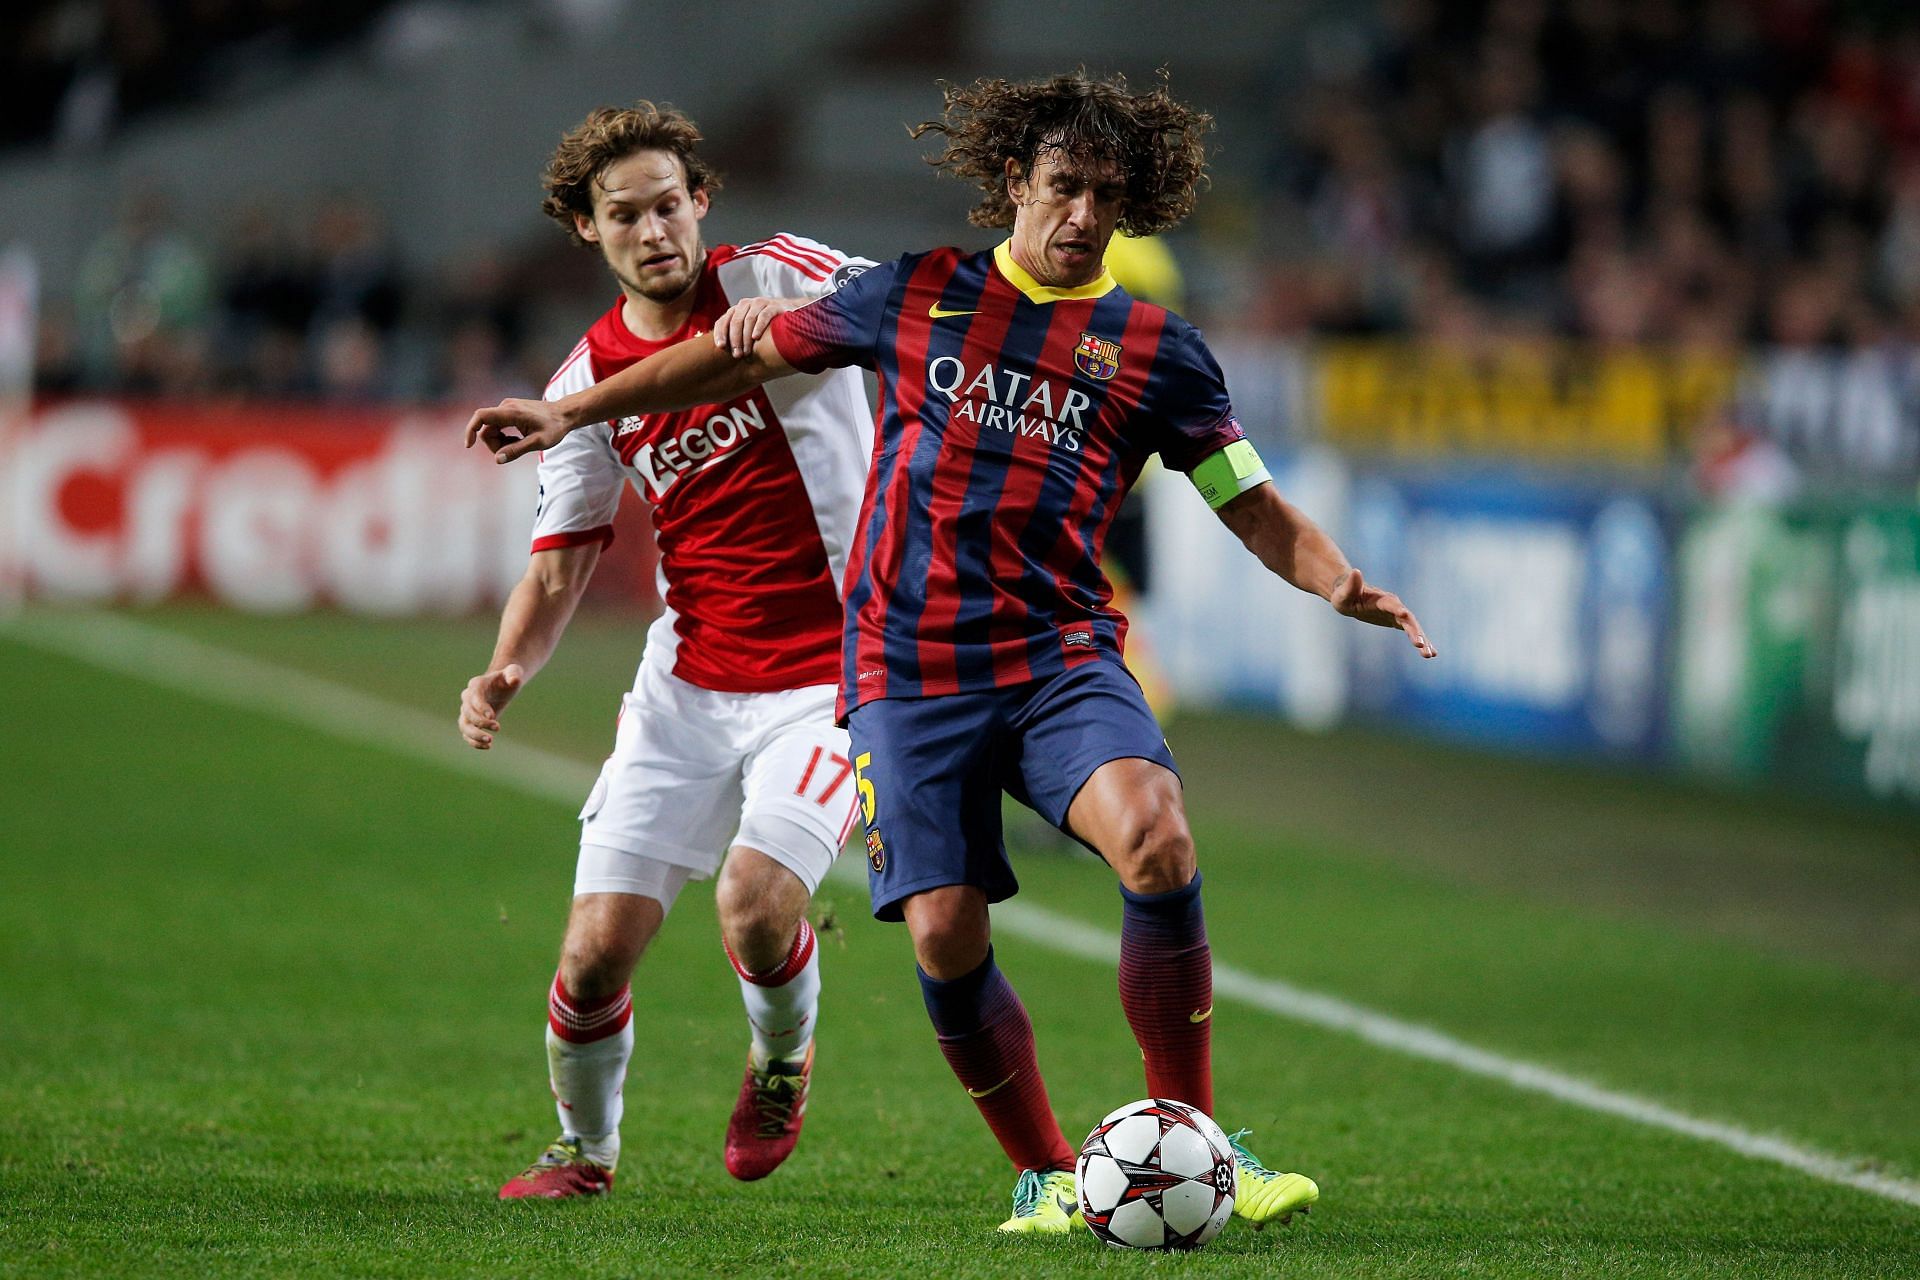 Puyol was the captain and leader of FC Barcelona.